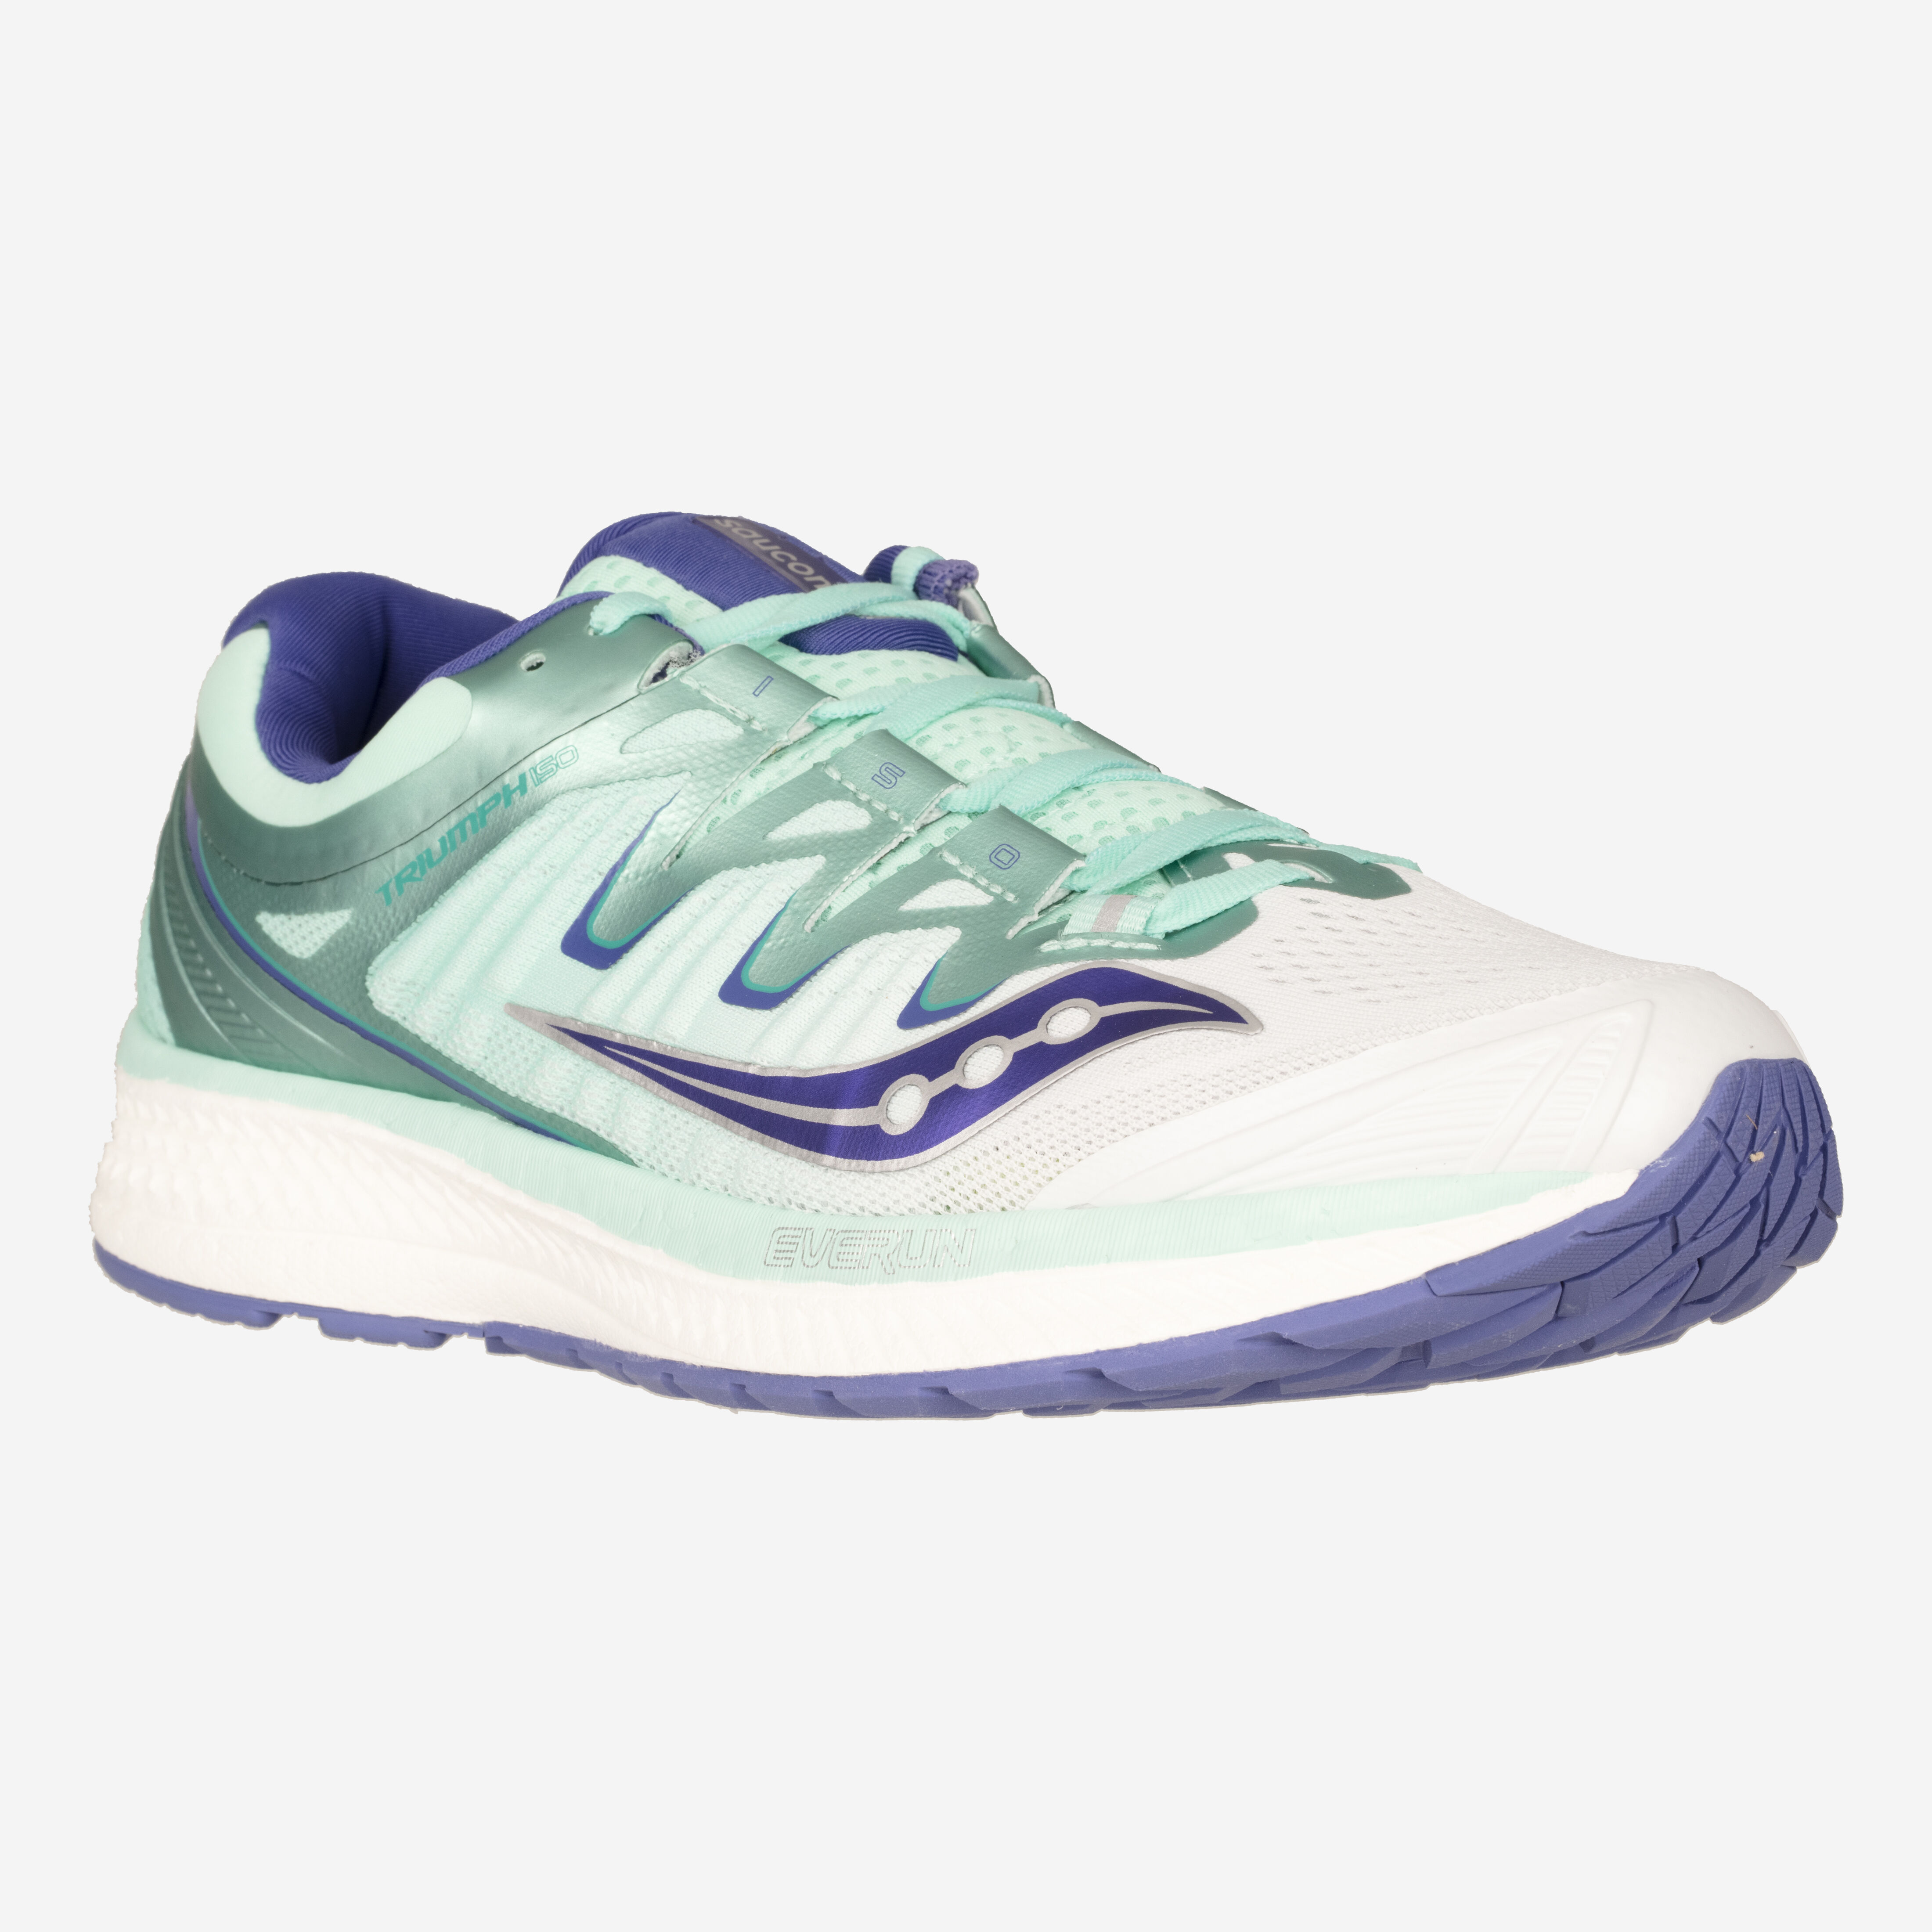 Saucony Triumph Iso mujer RUNKD online running store